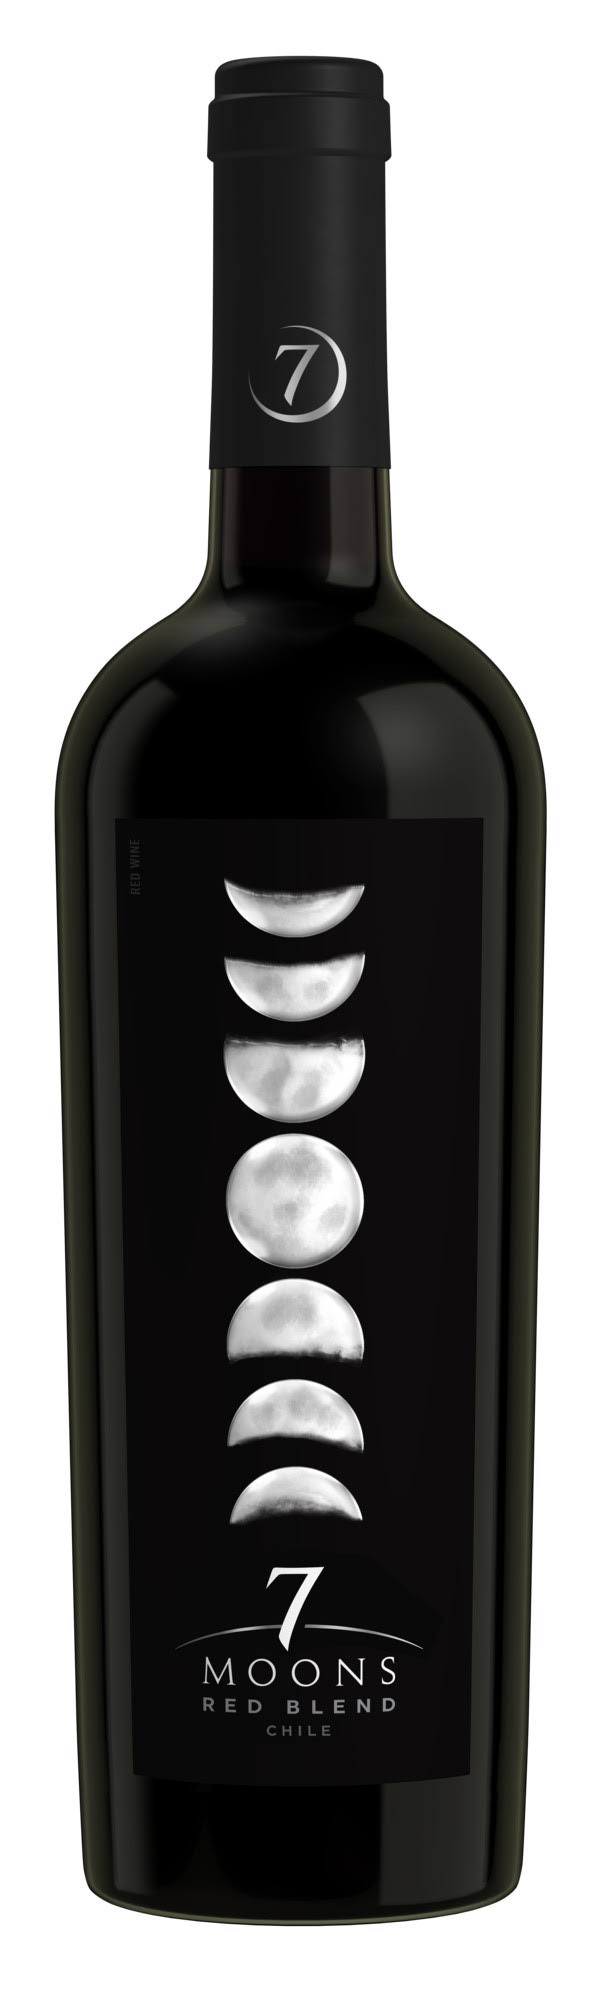 7 Moons Red Blend, Chile